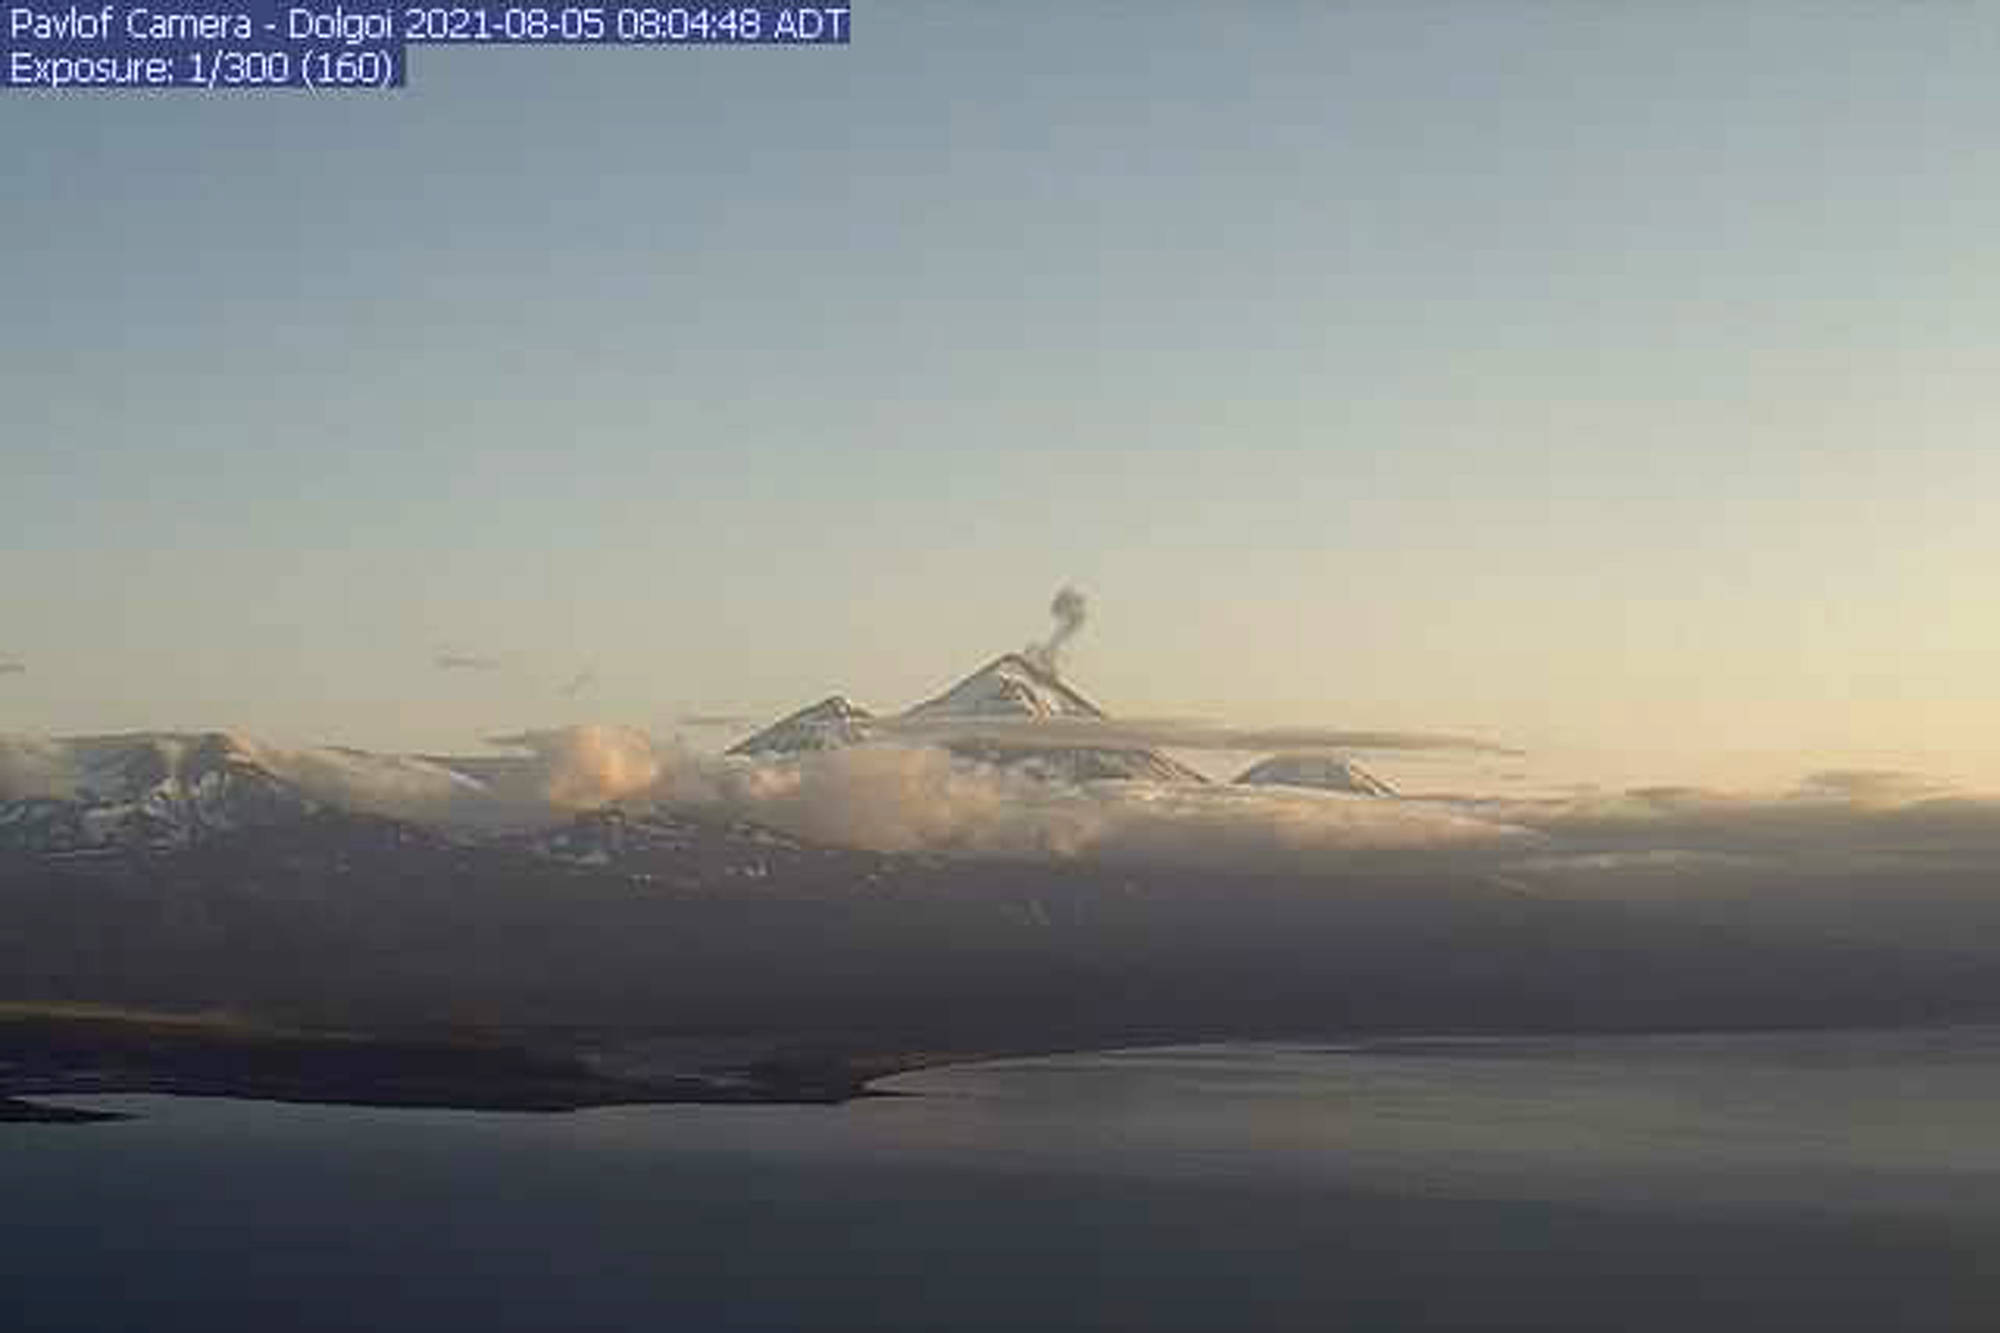 In this webcam image is the Pavlof Volcano in a state of eruption with episodic low-level ash emissions on Thursday, Aug. 5, 2021. Three remote Alaska volcanos are each in a state of eruption, one producing lava and the other two blowing steam and ash. So far, no small communities near any of the three have been impacted, Chris Waythomas, a geologist with the Alaska Volcano Observatory, said Thursday. (Alaska Volcano Observatory)